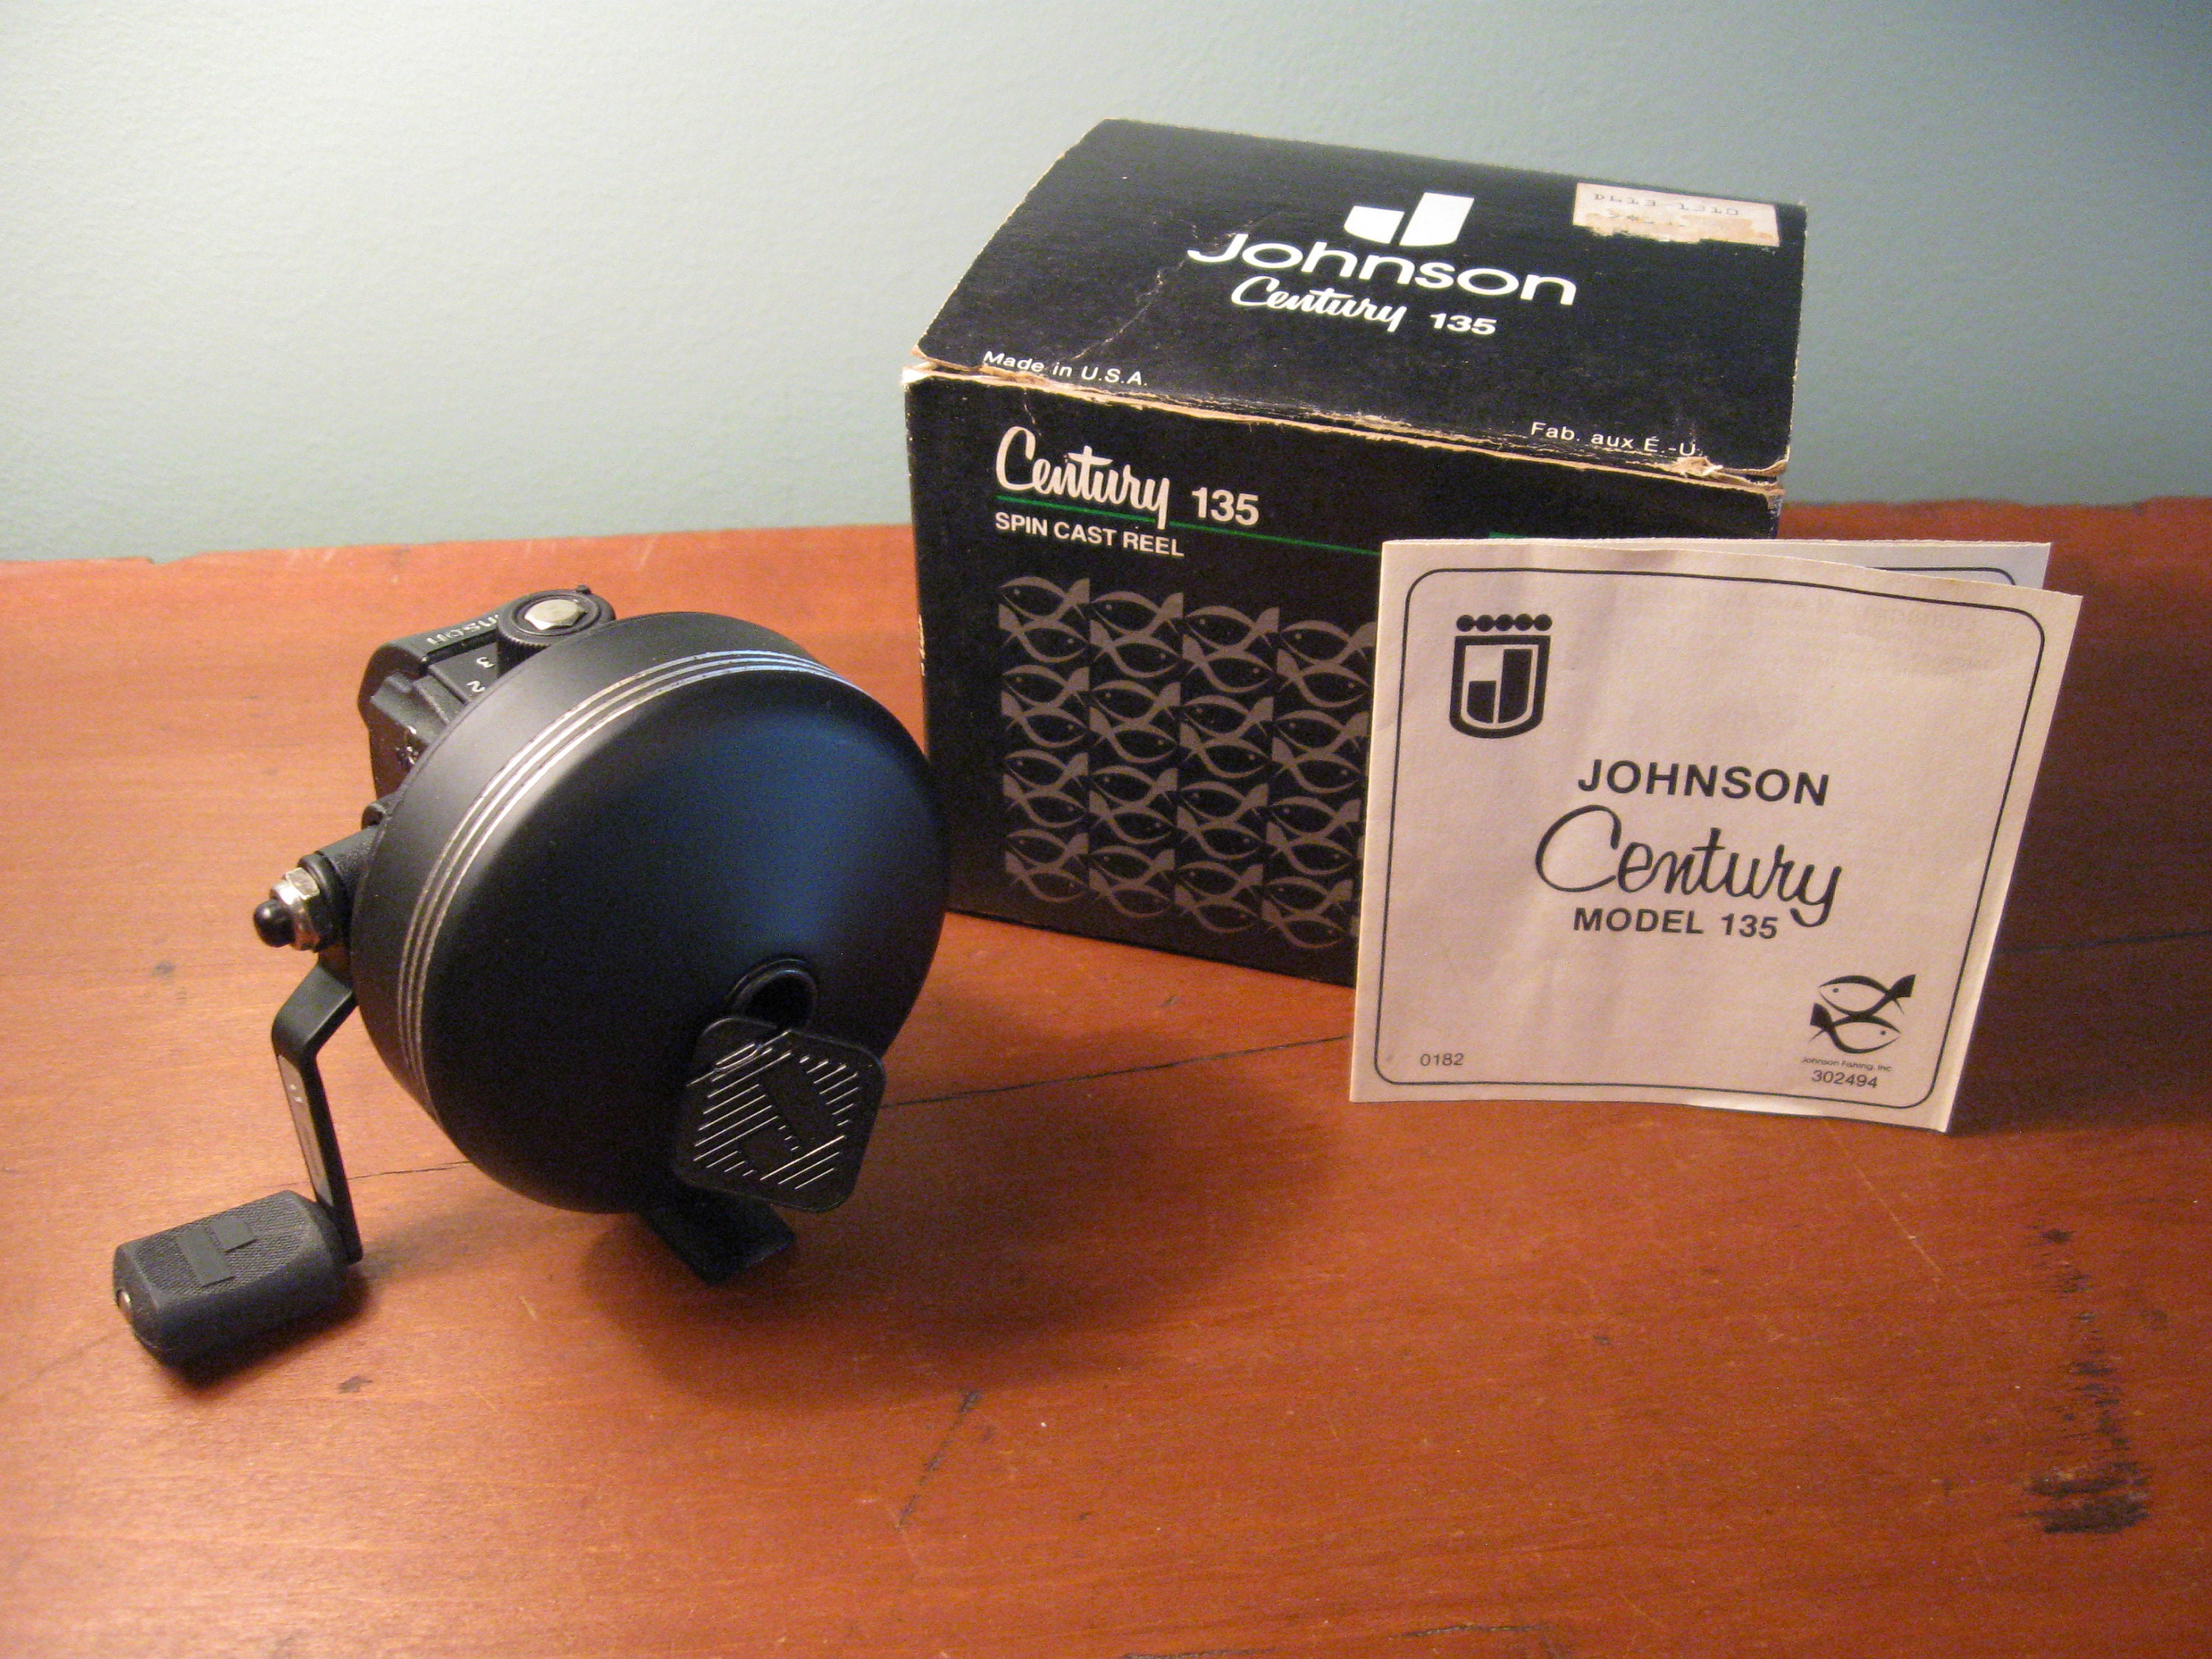 JOHNSON Century 135 Fishing Reel in Original Box w/Paperwork From 1981-82 (  Unused ) Use It or Add to Your Collection